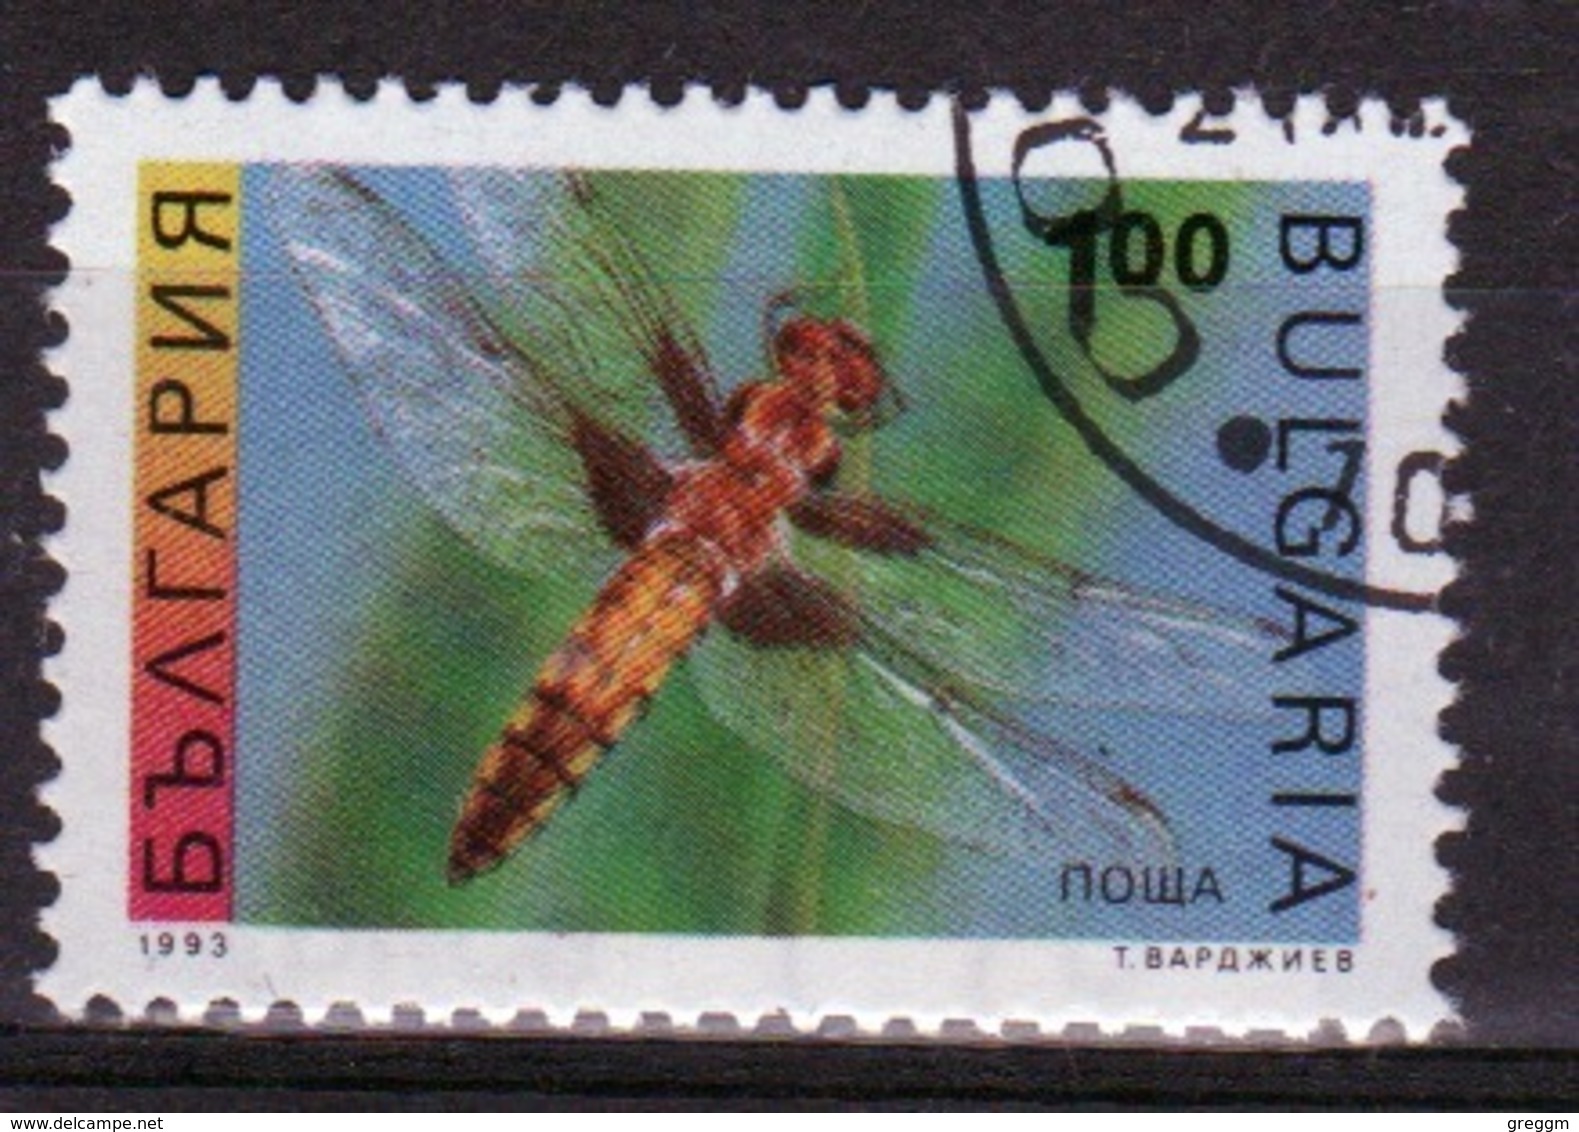 Bulgaria 1992 Single 1L Stamp From The Insects Series. - Gebruikt